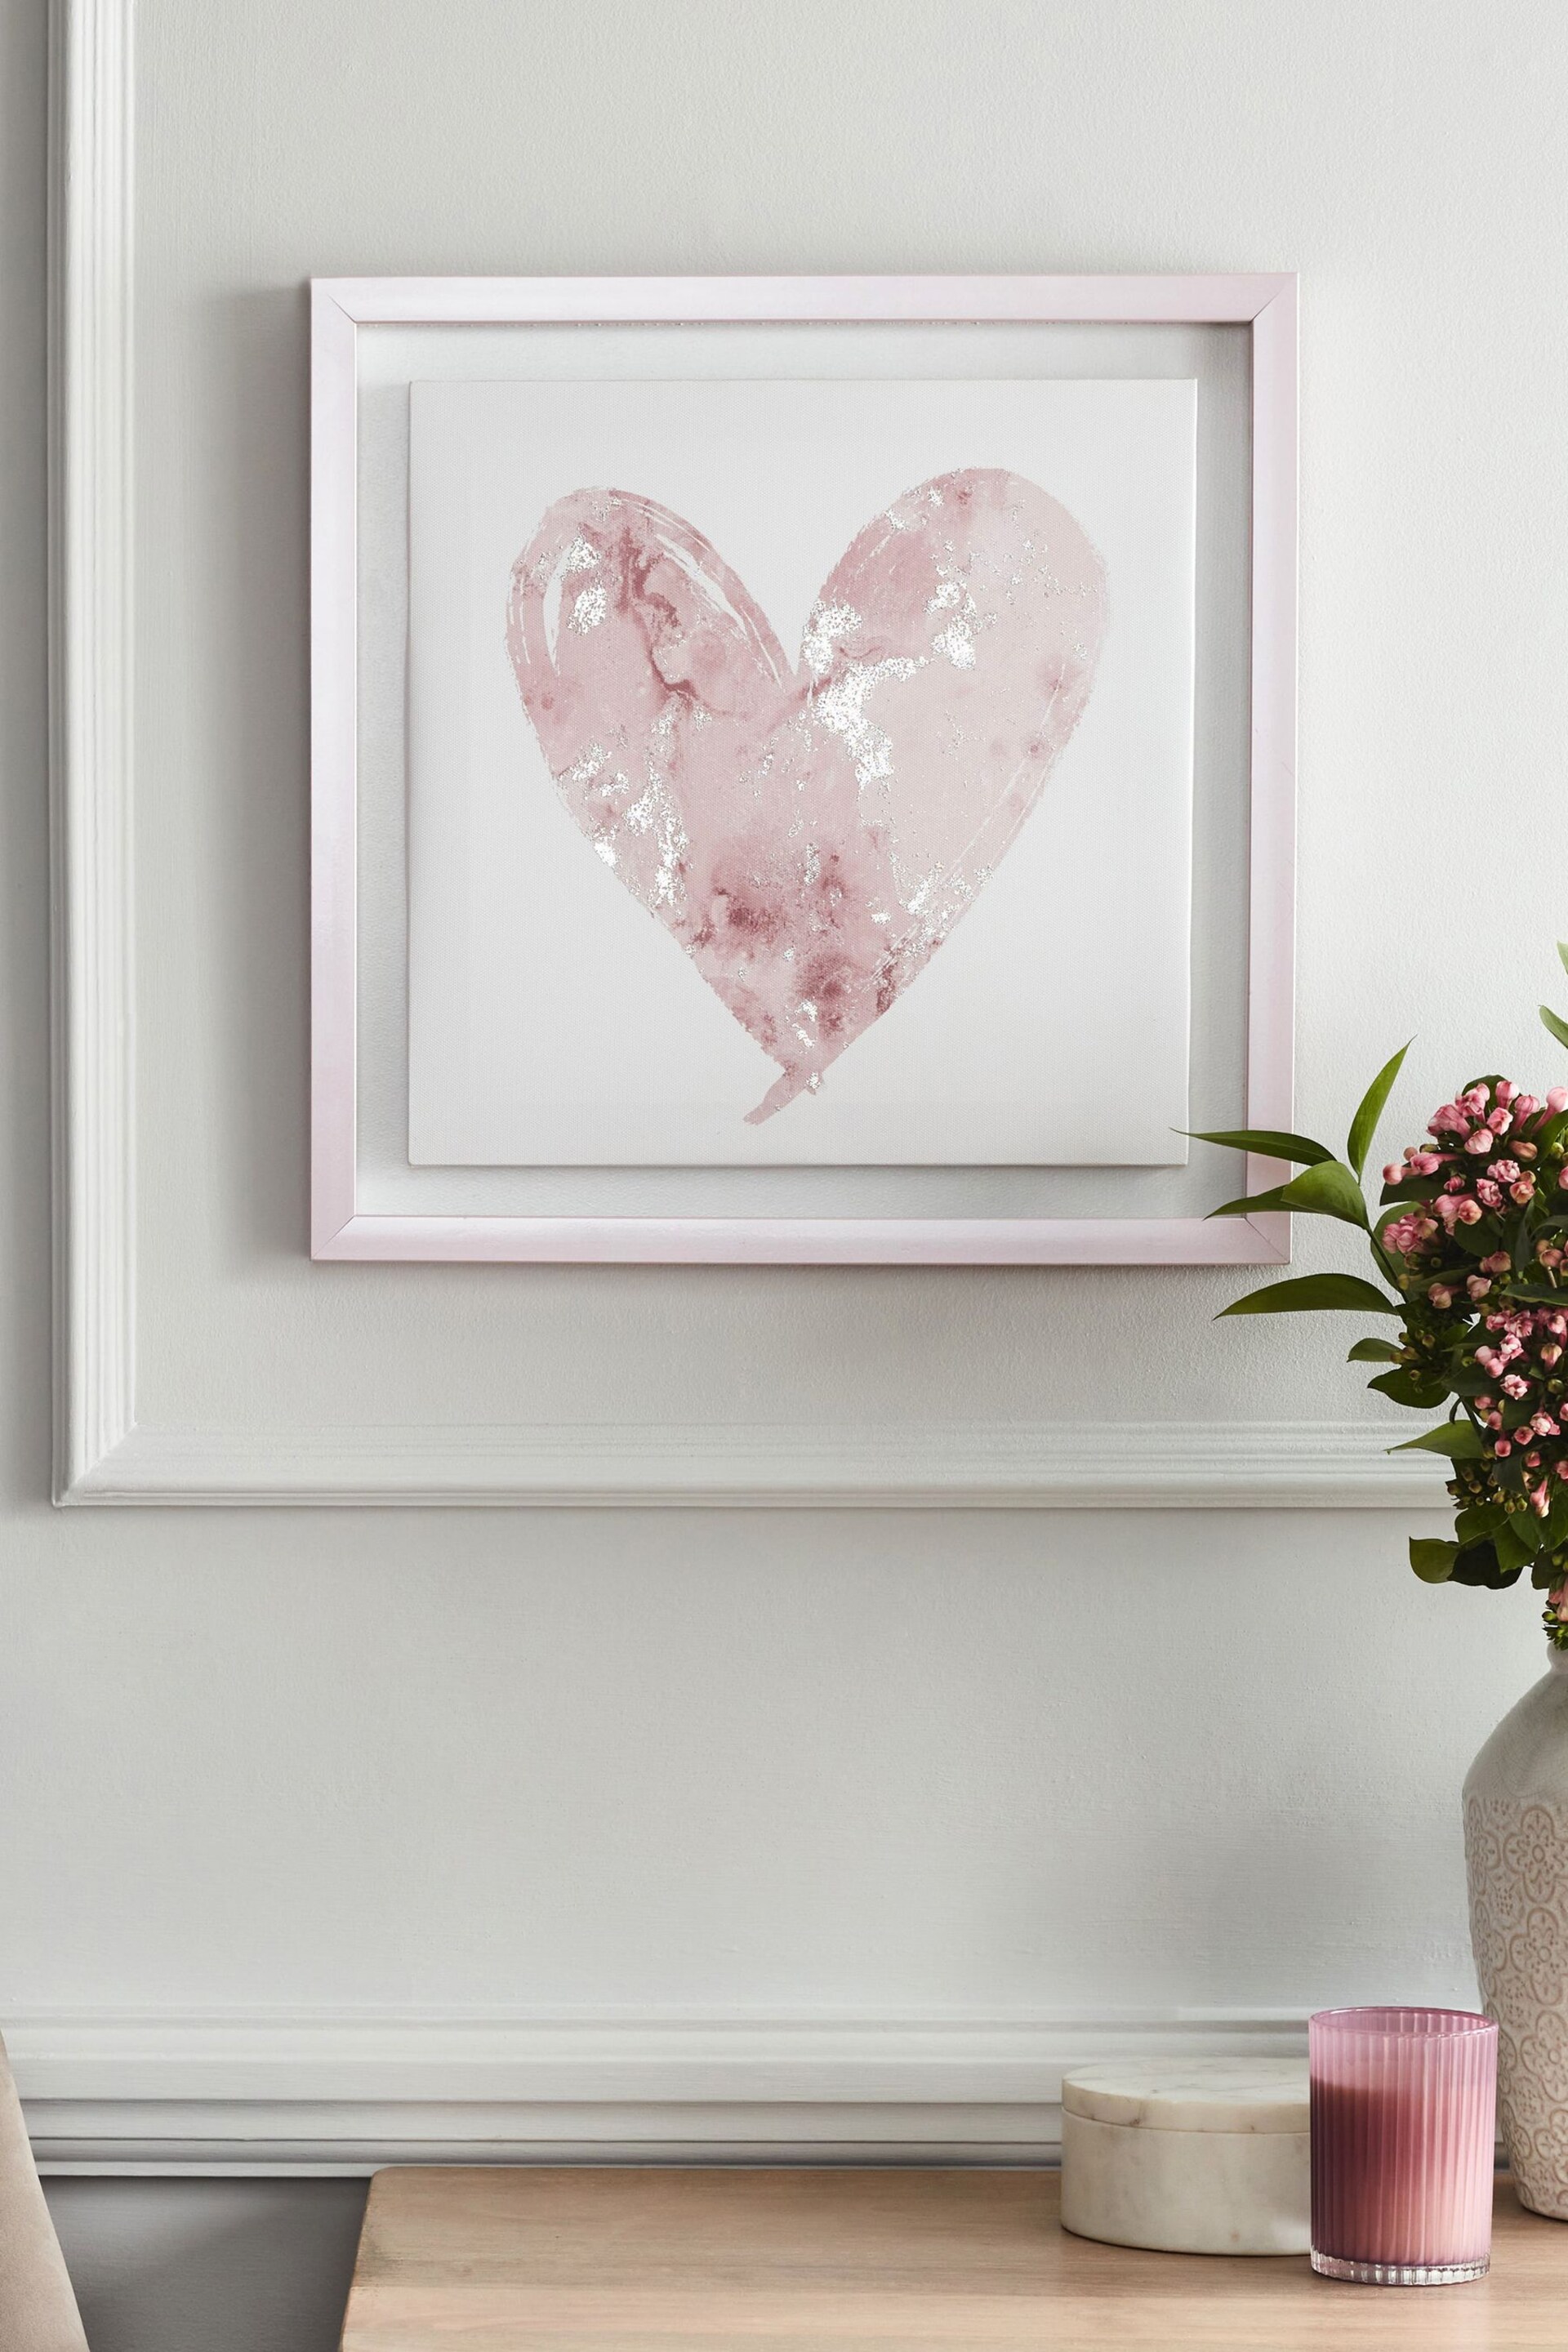 Pink Heart Framed Canvas Wall Art - Image 1 of 5